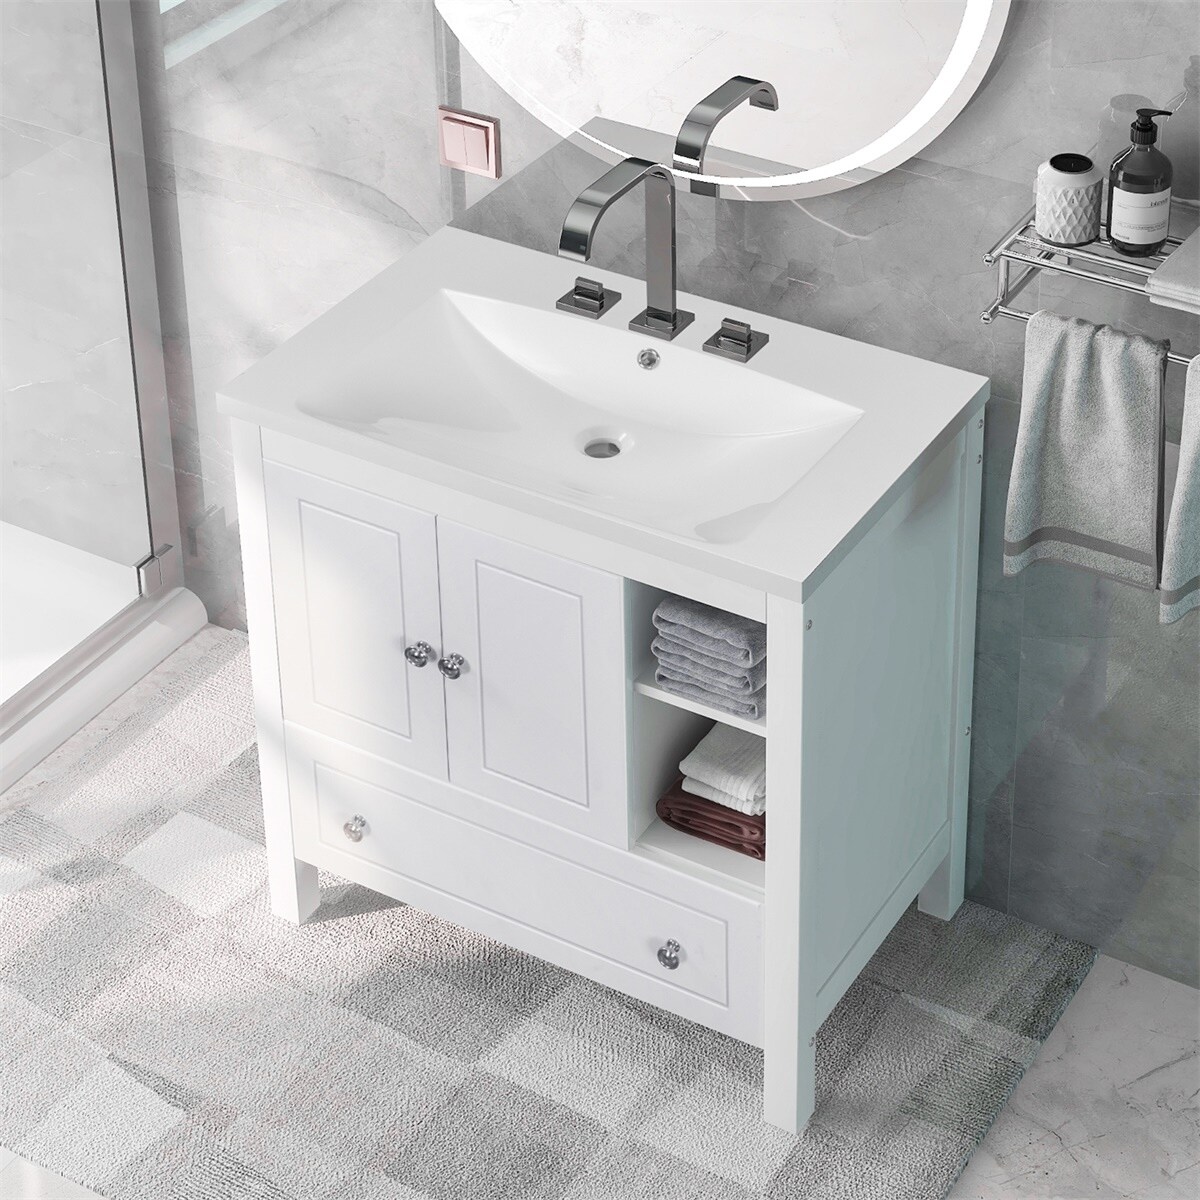 https://ak1.ostkcdn.com/images/products/is/images/direct/0c6d3d8729d5a1cd7e34b69ed79d837bc78f9b14/Merax-30%22-Bathroom-Vanity-with-Sink%2C-Storage-Cabinet-with-Doors-and-Drawers.jpg